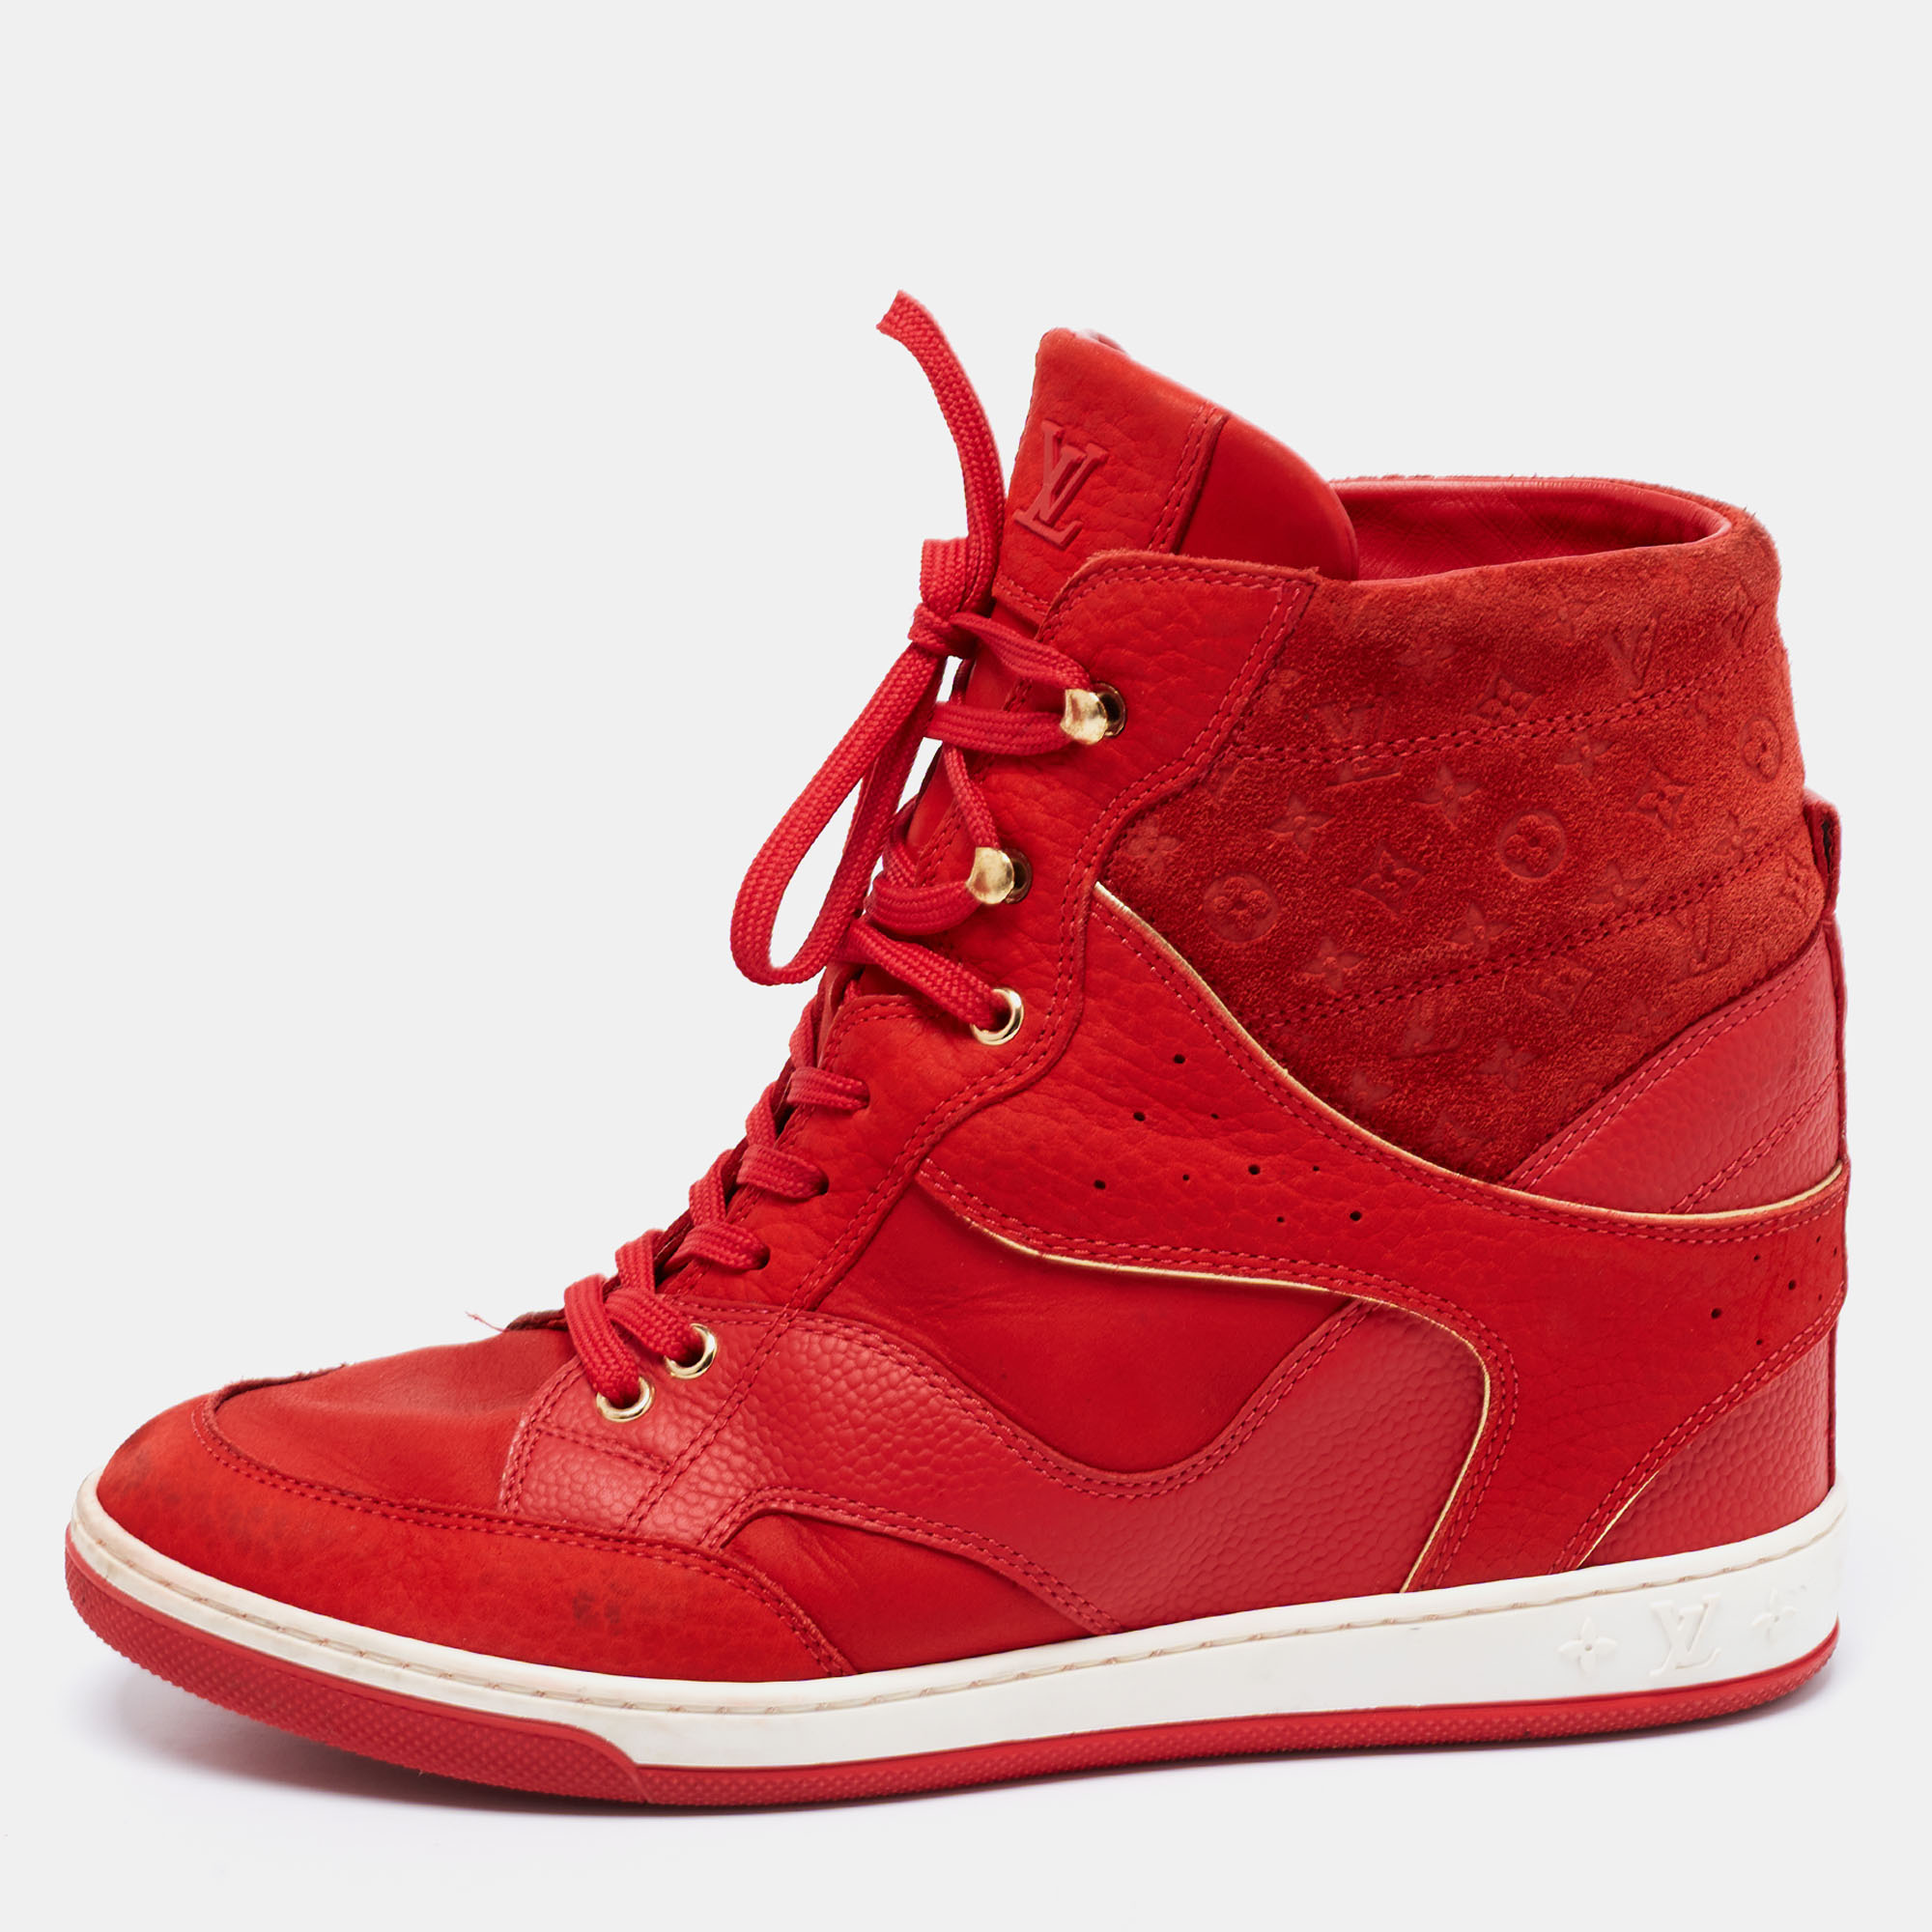 Presenting a sporty design thats blended with the LV touch of luxury. These Millenium wedge sneakers for women are crafted beautifully using quality materials and are set on wedge heels. Lace up closure and monogram embossing lend the perfect finish.